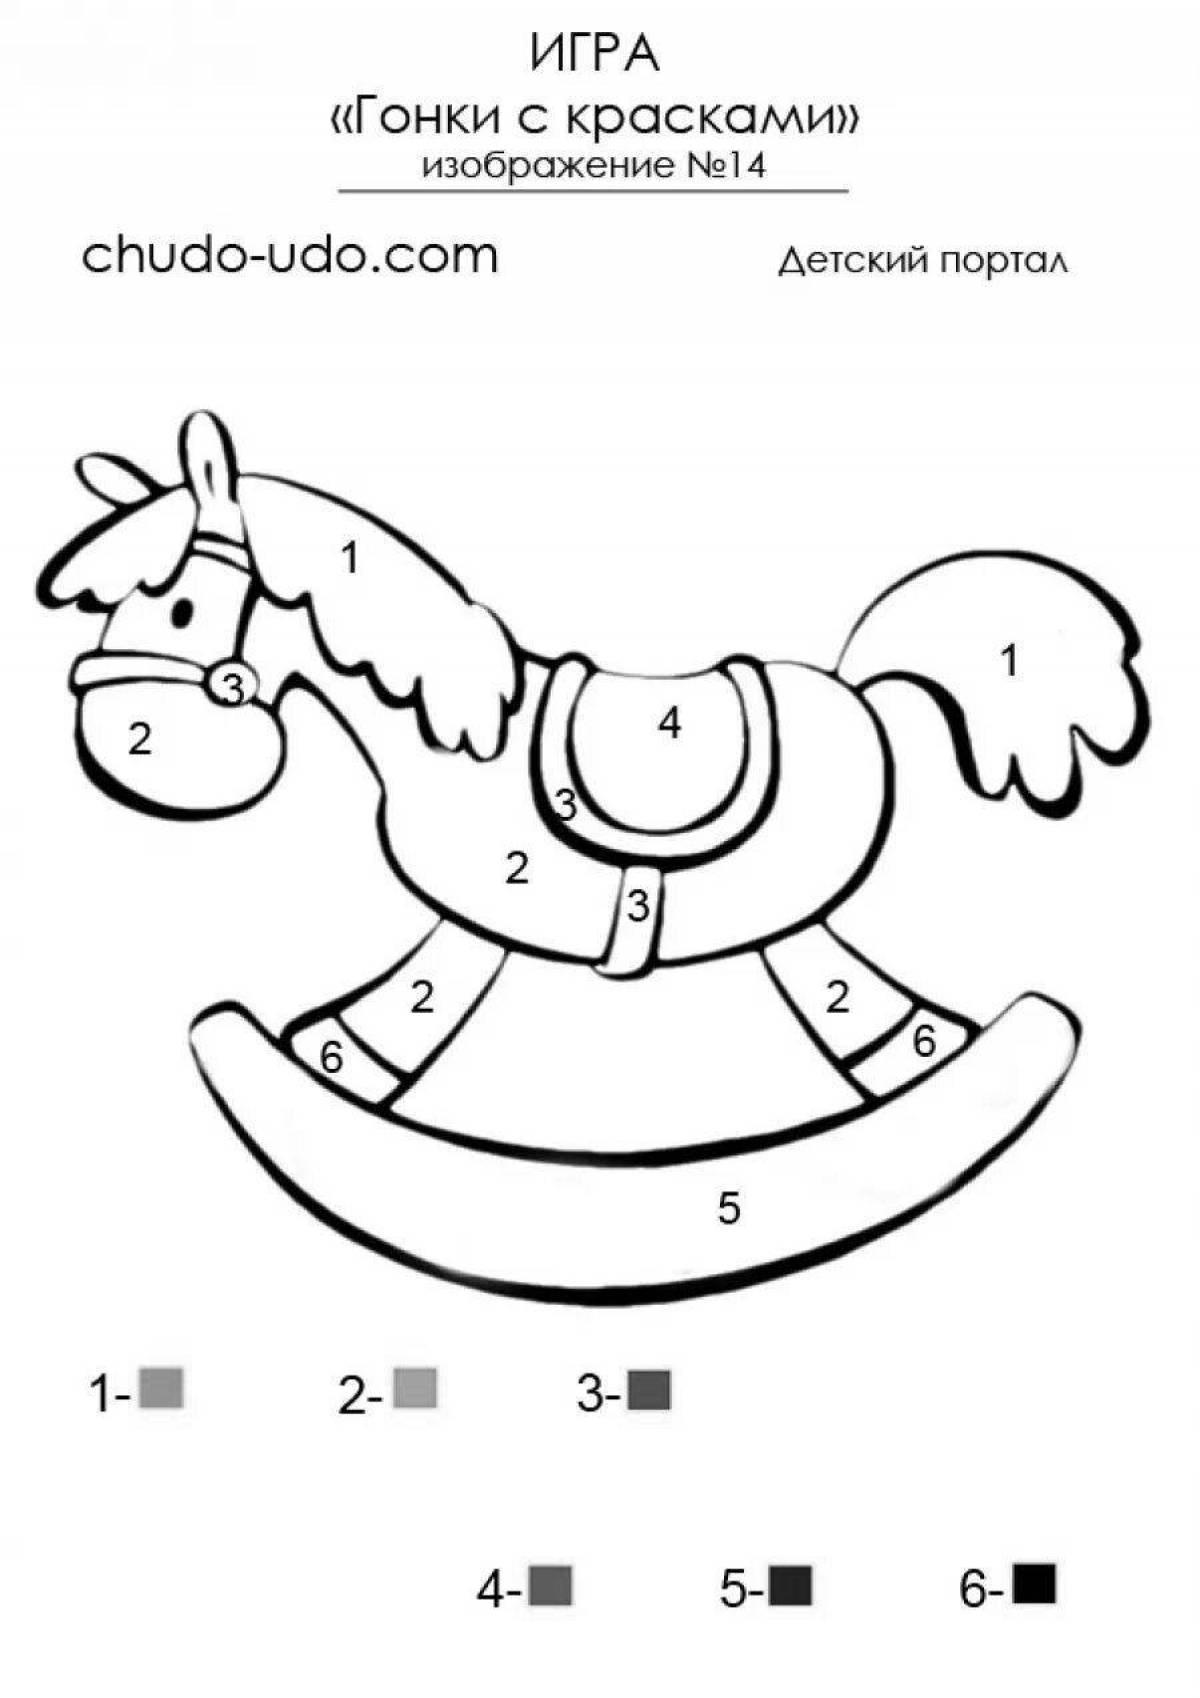 Shiny horse toy coloring book